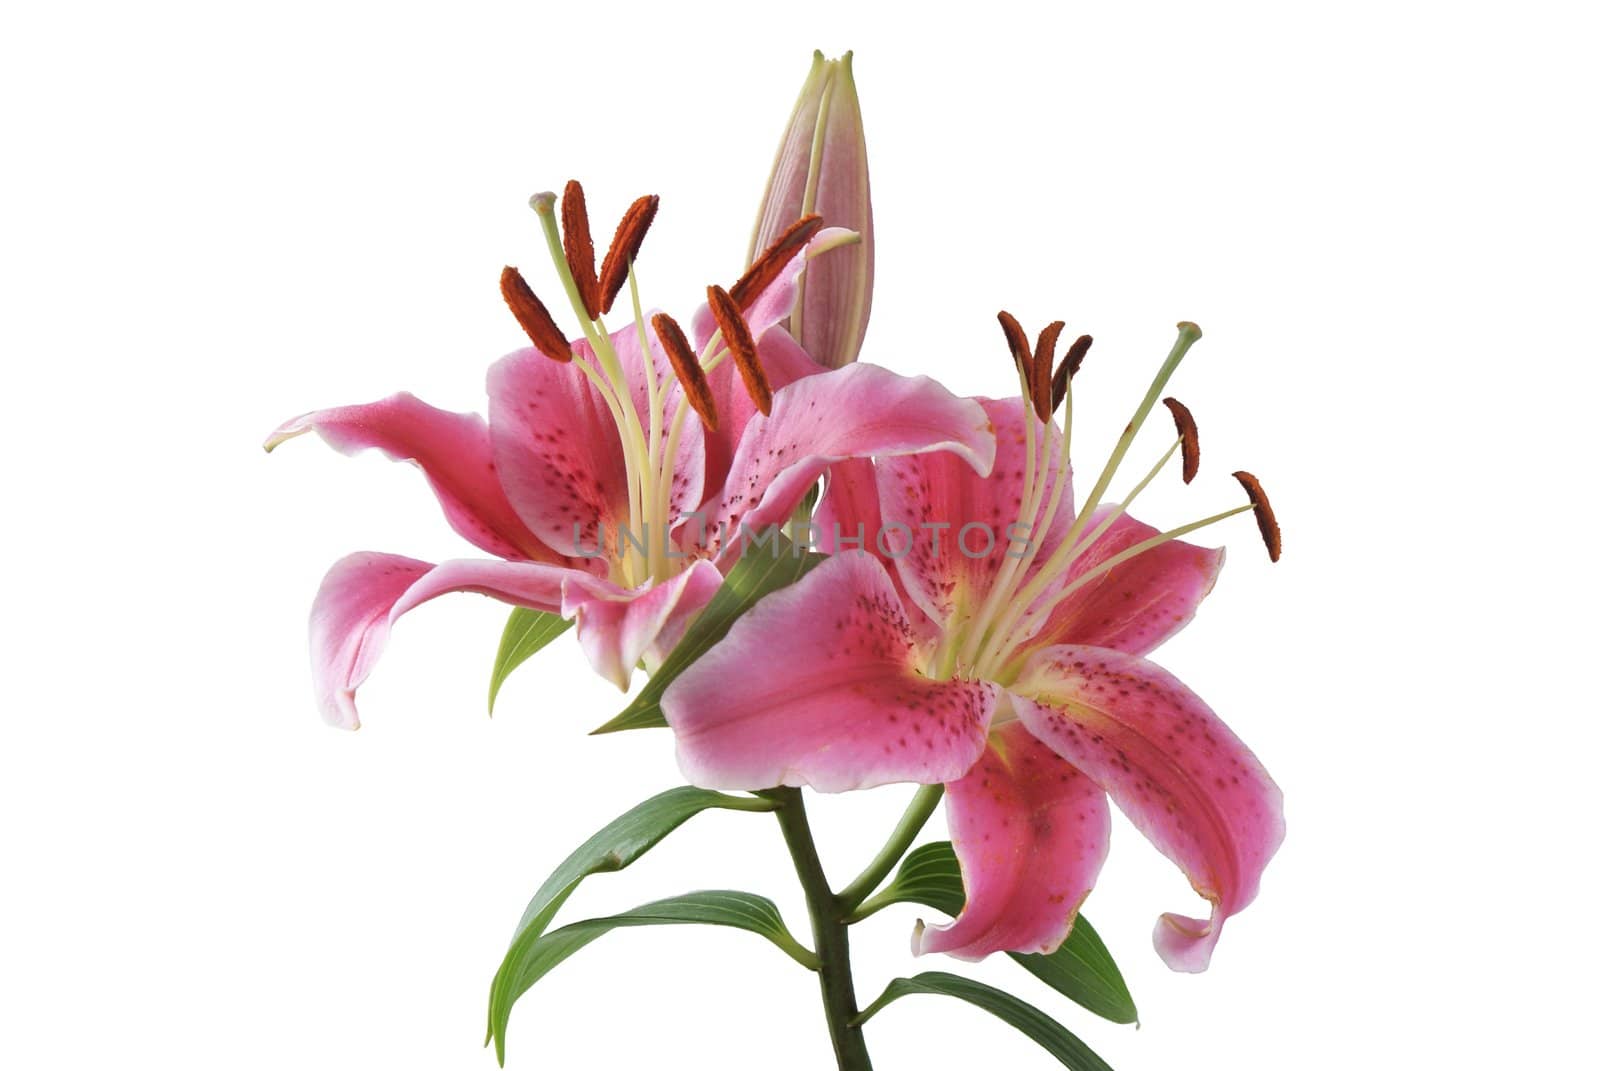 amaranthine and very sweet scented lilies